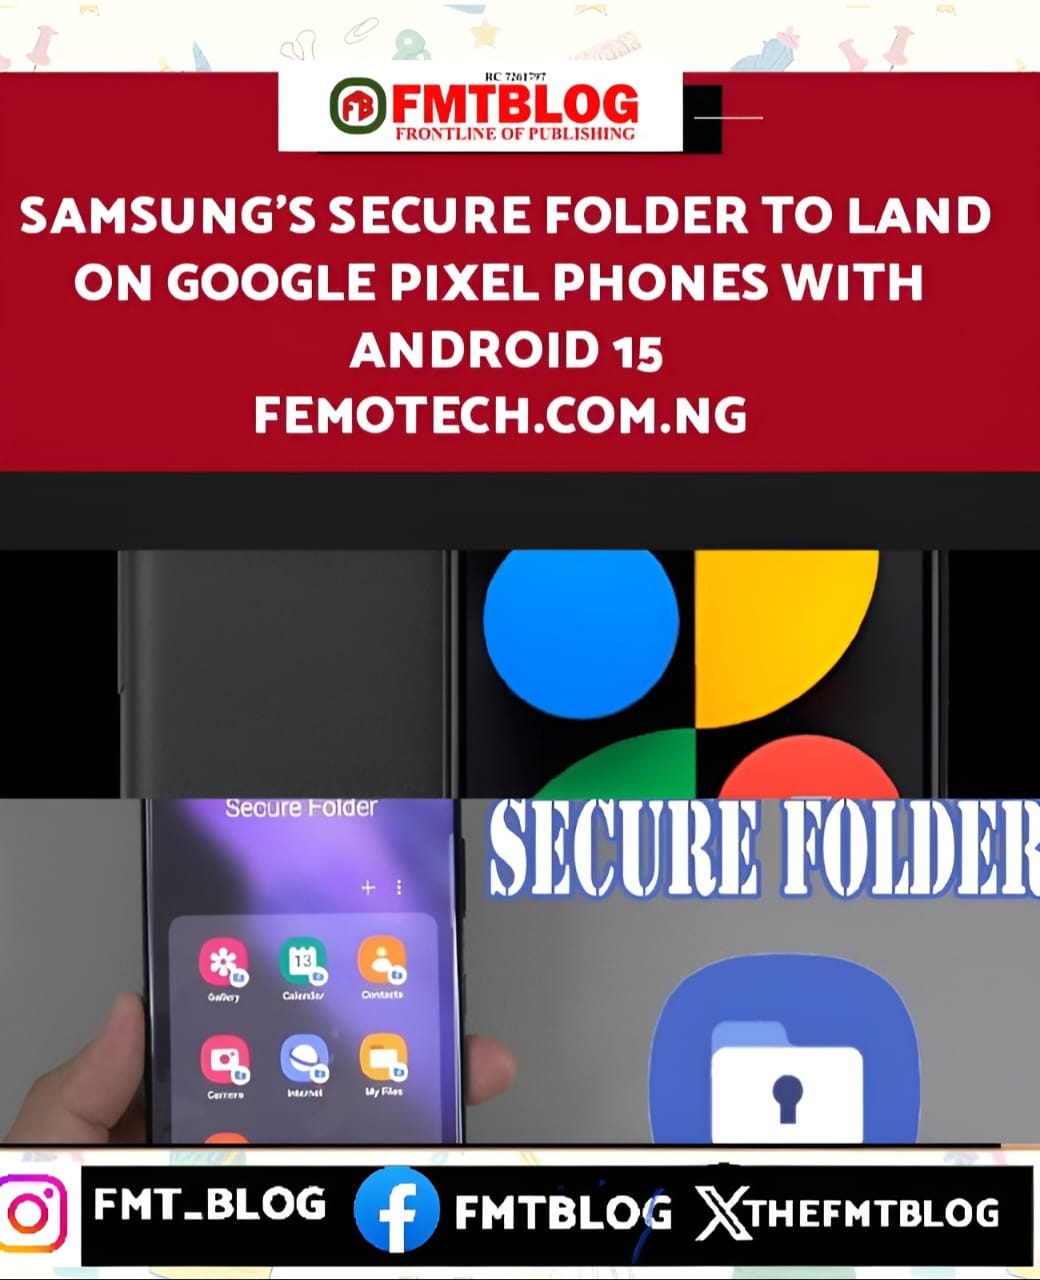 Samsung’s Secure Folder To Land On Google Pixel Phones With Android 15